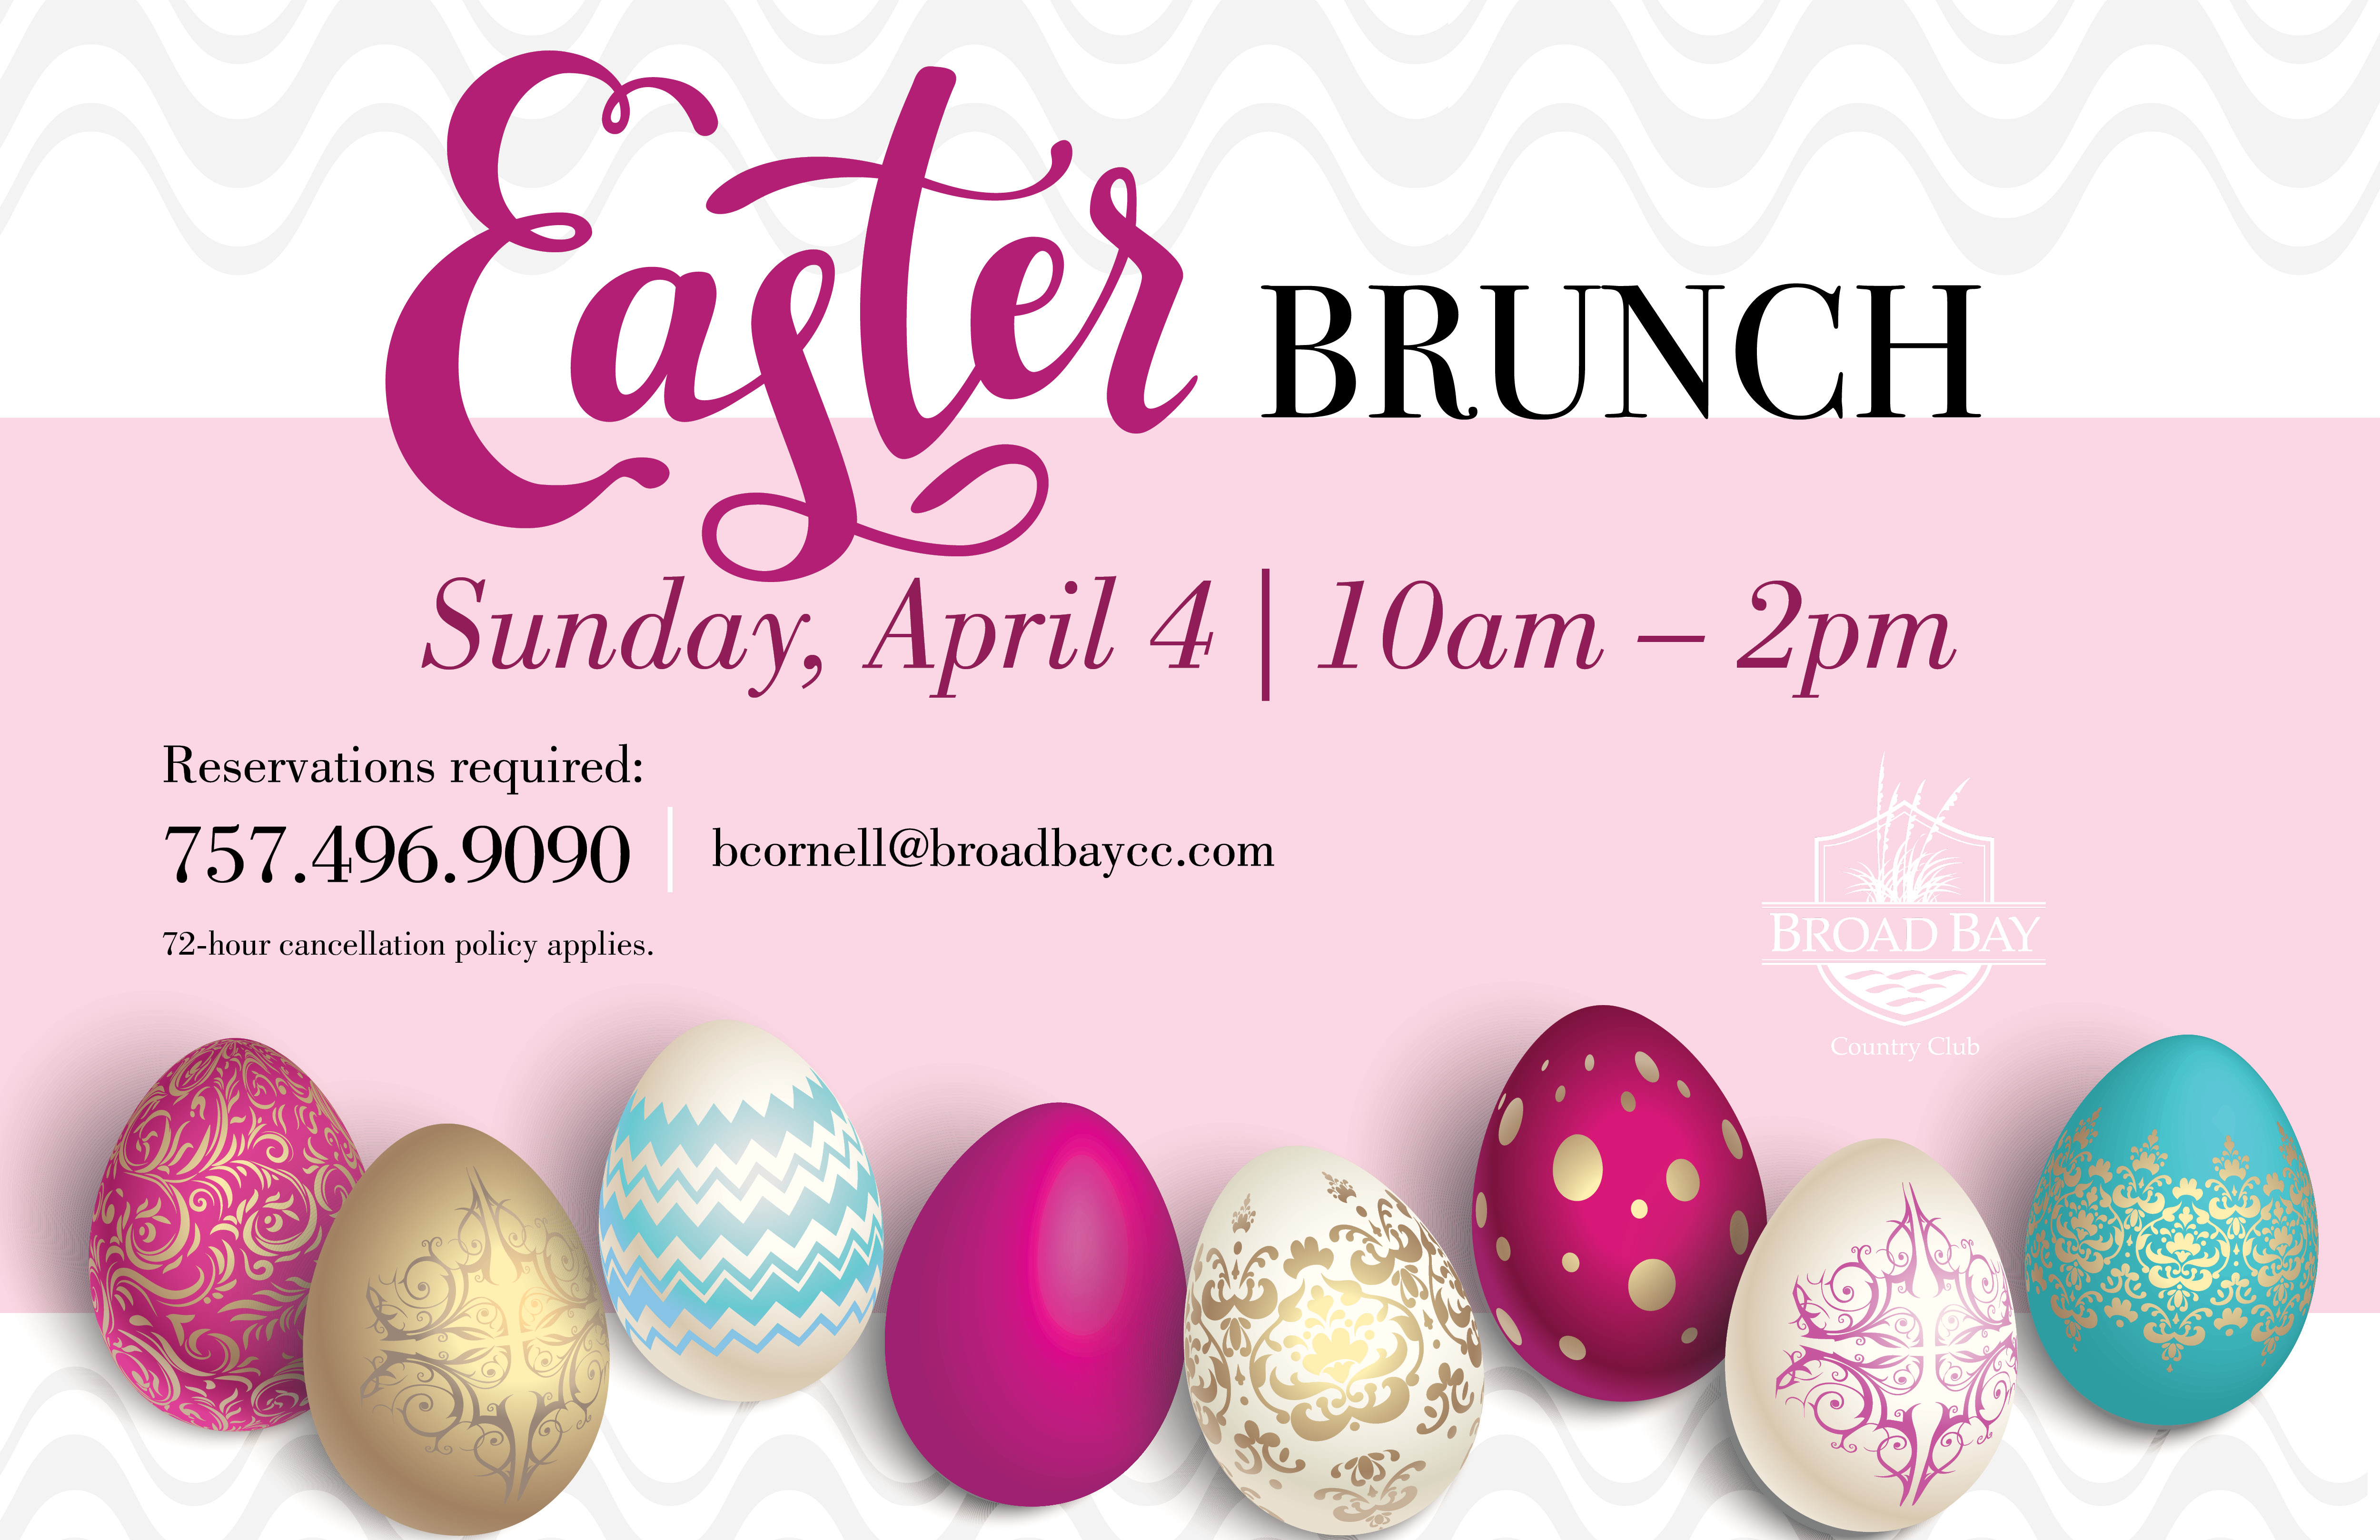 Easter Brunch | Broad Bay Country Club | Sunday, April 4, 2021